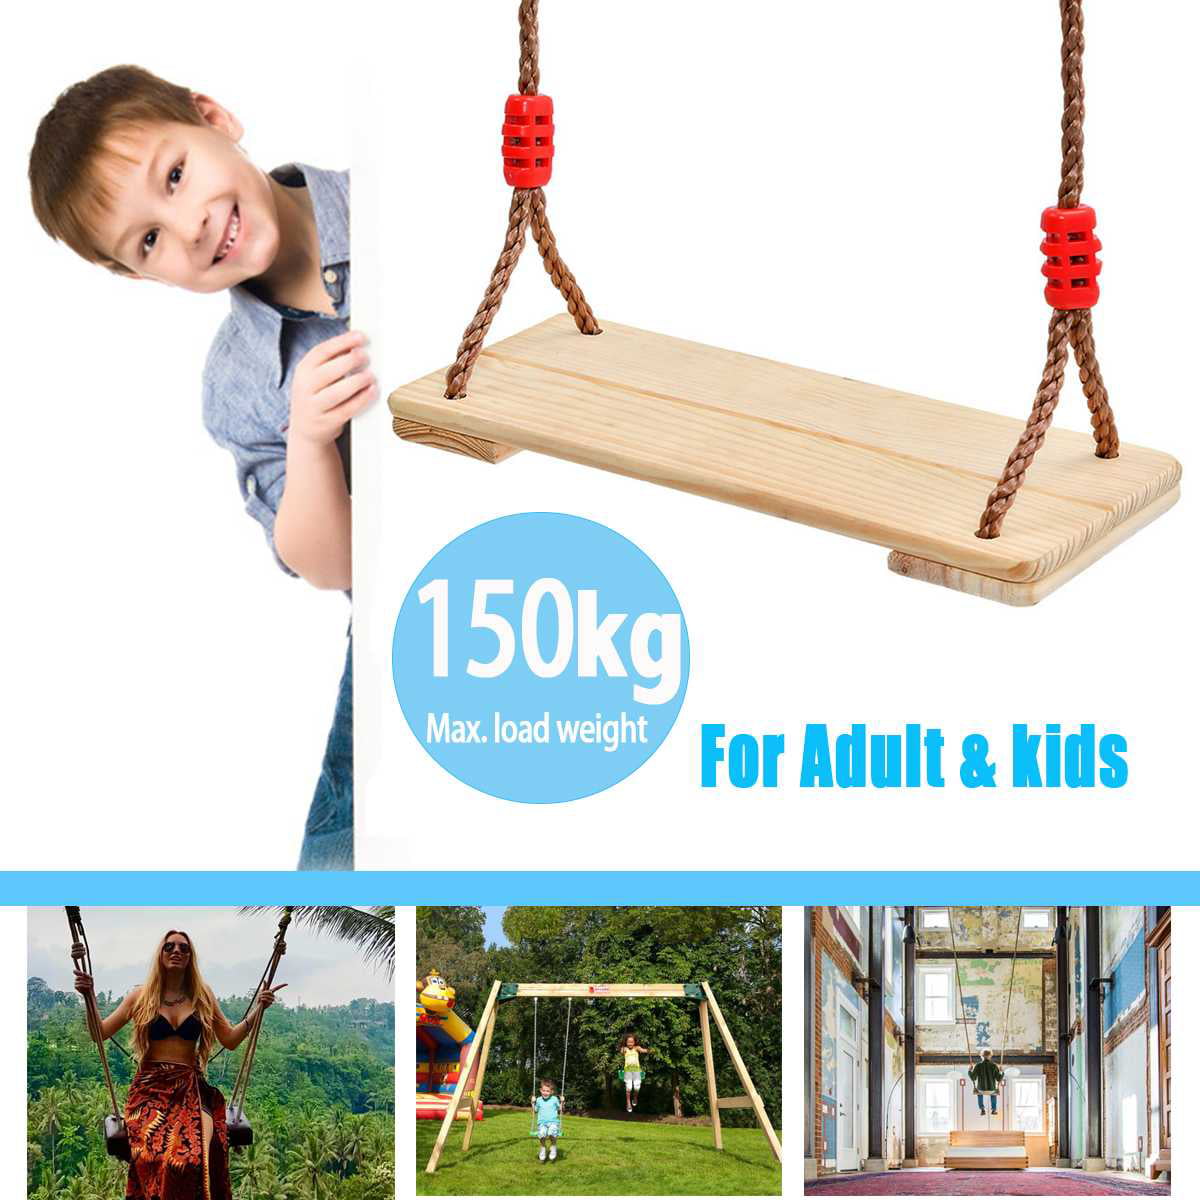 Adult Children Swing Seat wooden Swing Seat Outdoor Indoor Playground Toys Gifts 